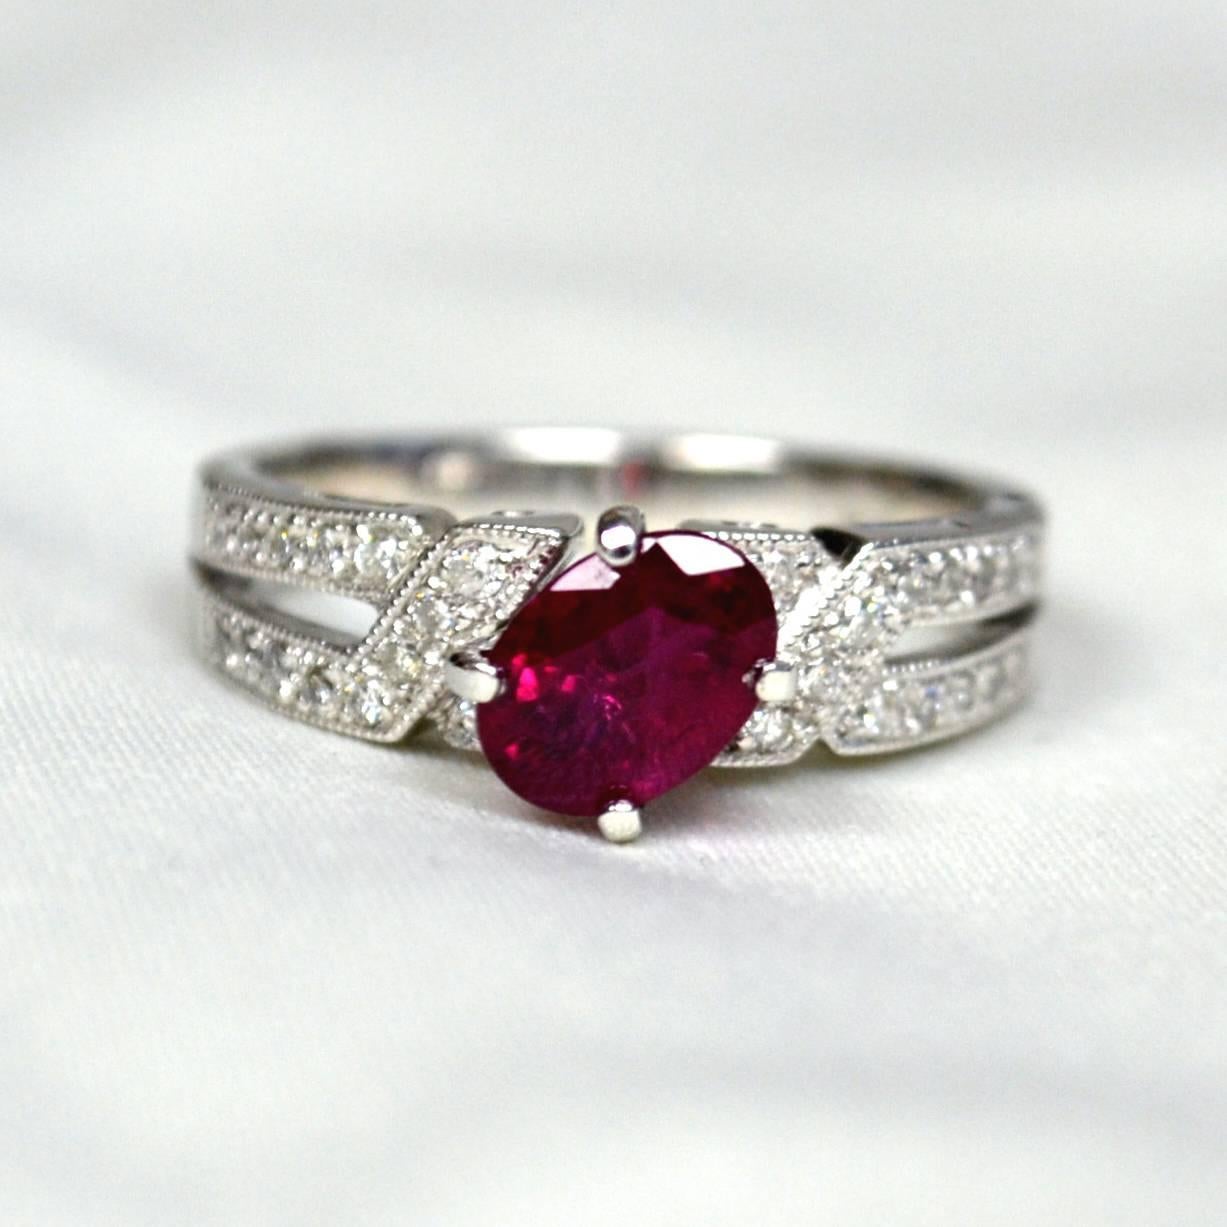 Ring in 18 karat white gold set with an oval 7x5 mm vivid red Mozambique Ruby ( 1.18 carat) and round brilliant-cut Diamonds (0.22 carats).

Ring US Size 6
*Complimentary resizing service*